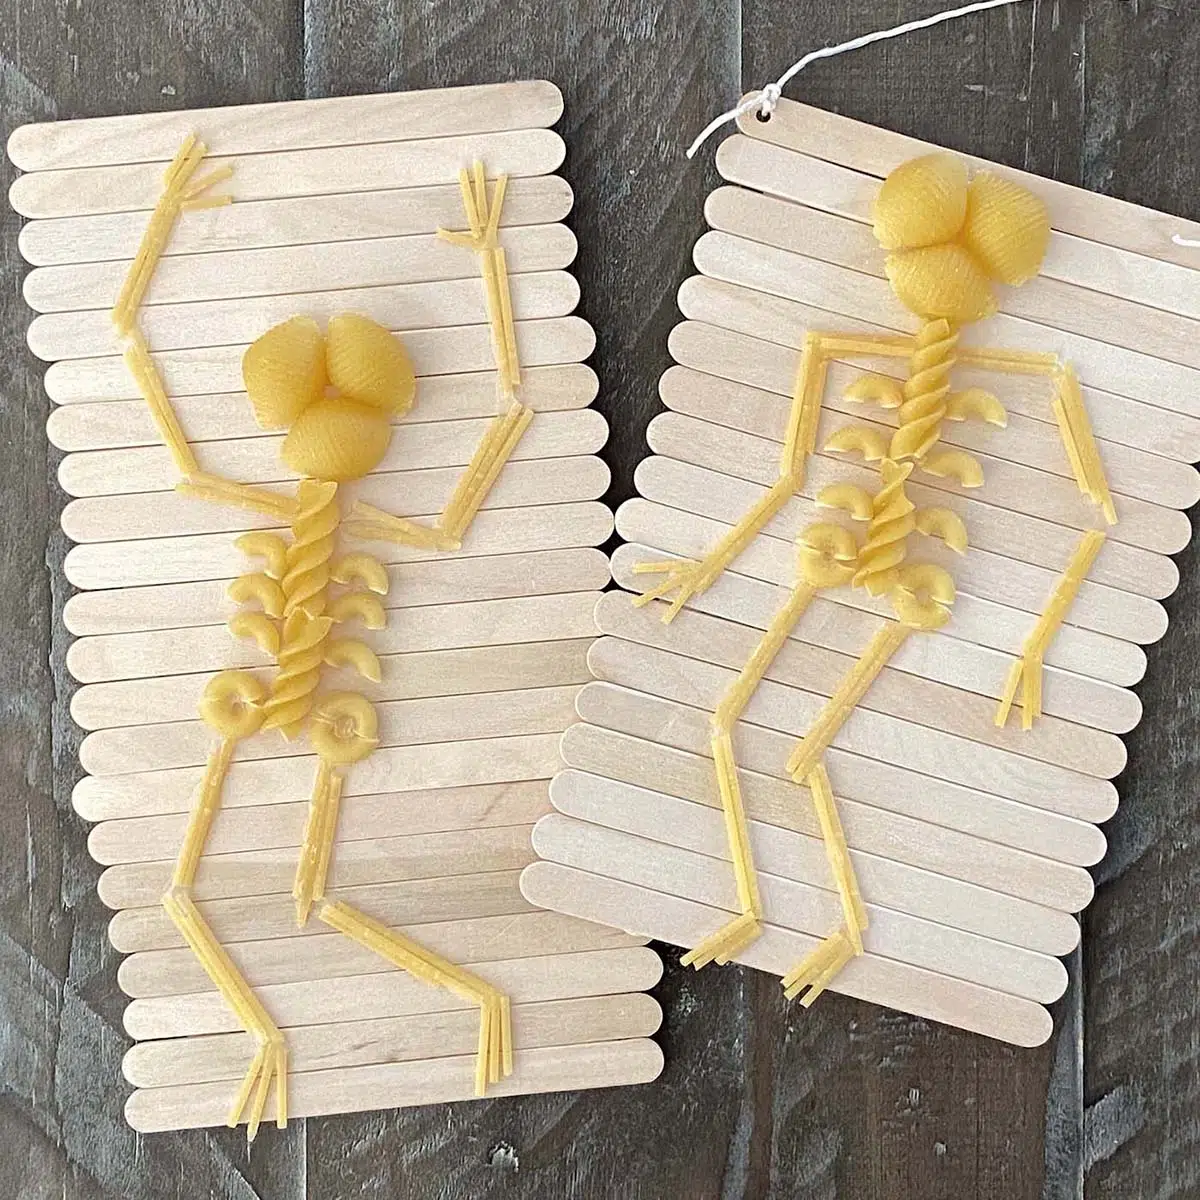 Pasta Skeleton Craft Project: Easy Activity Idea for School How-To Lesson